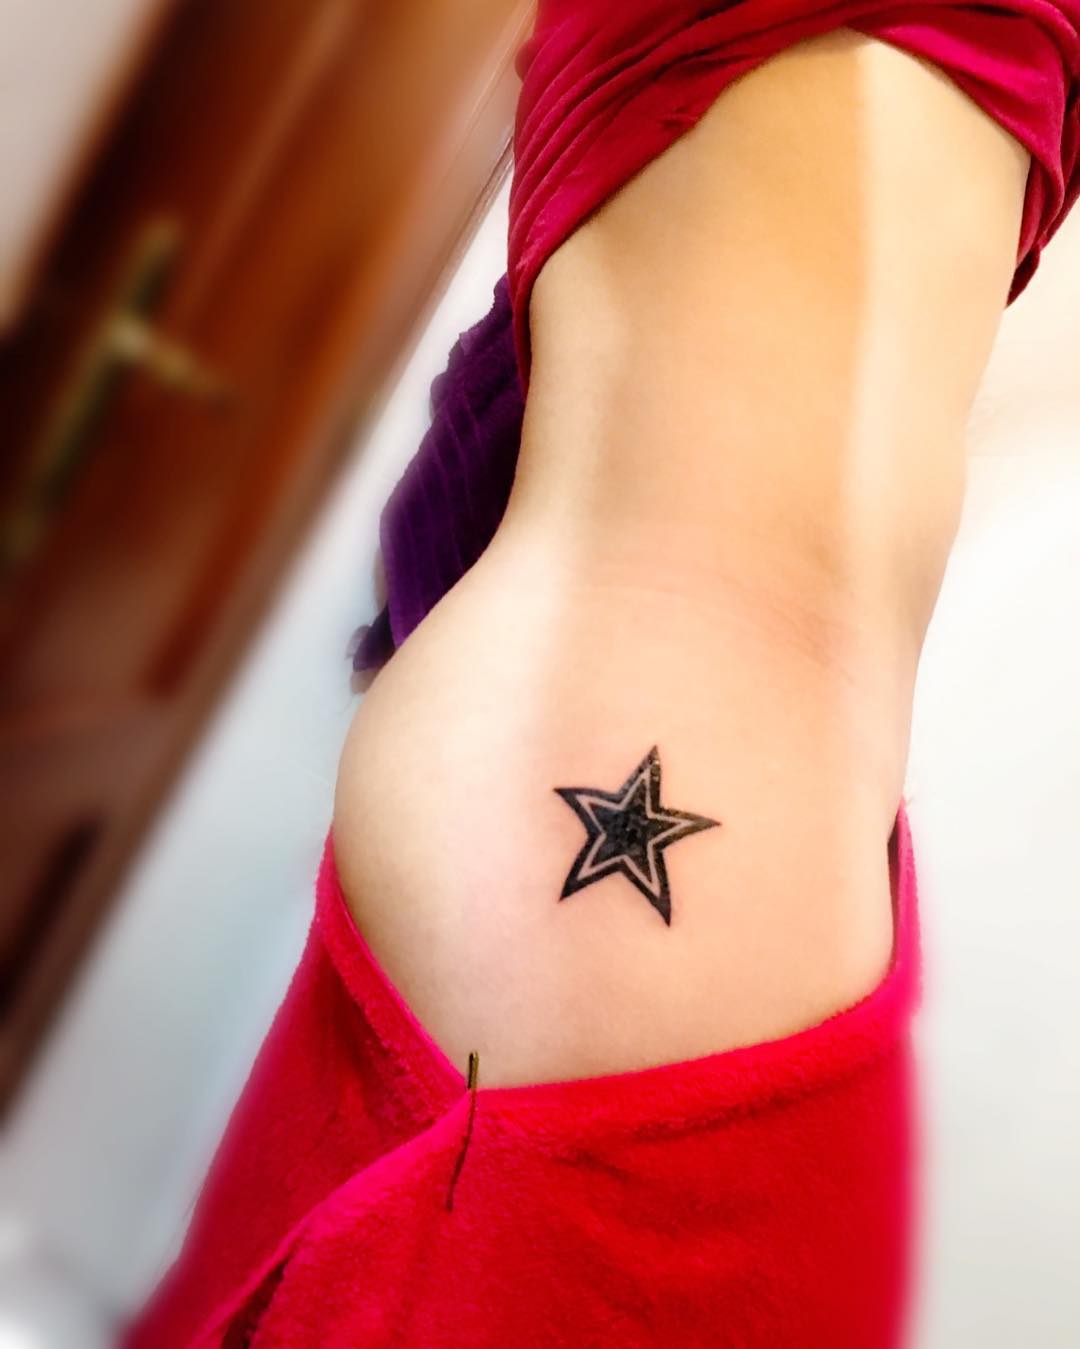 55 Unique Star Tattoo Ideas to Take Body Art to a New Level